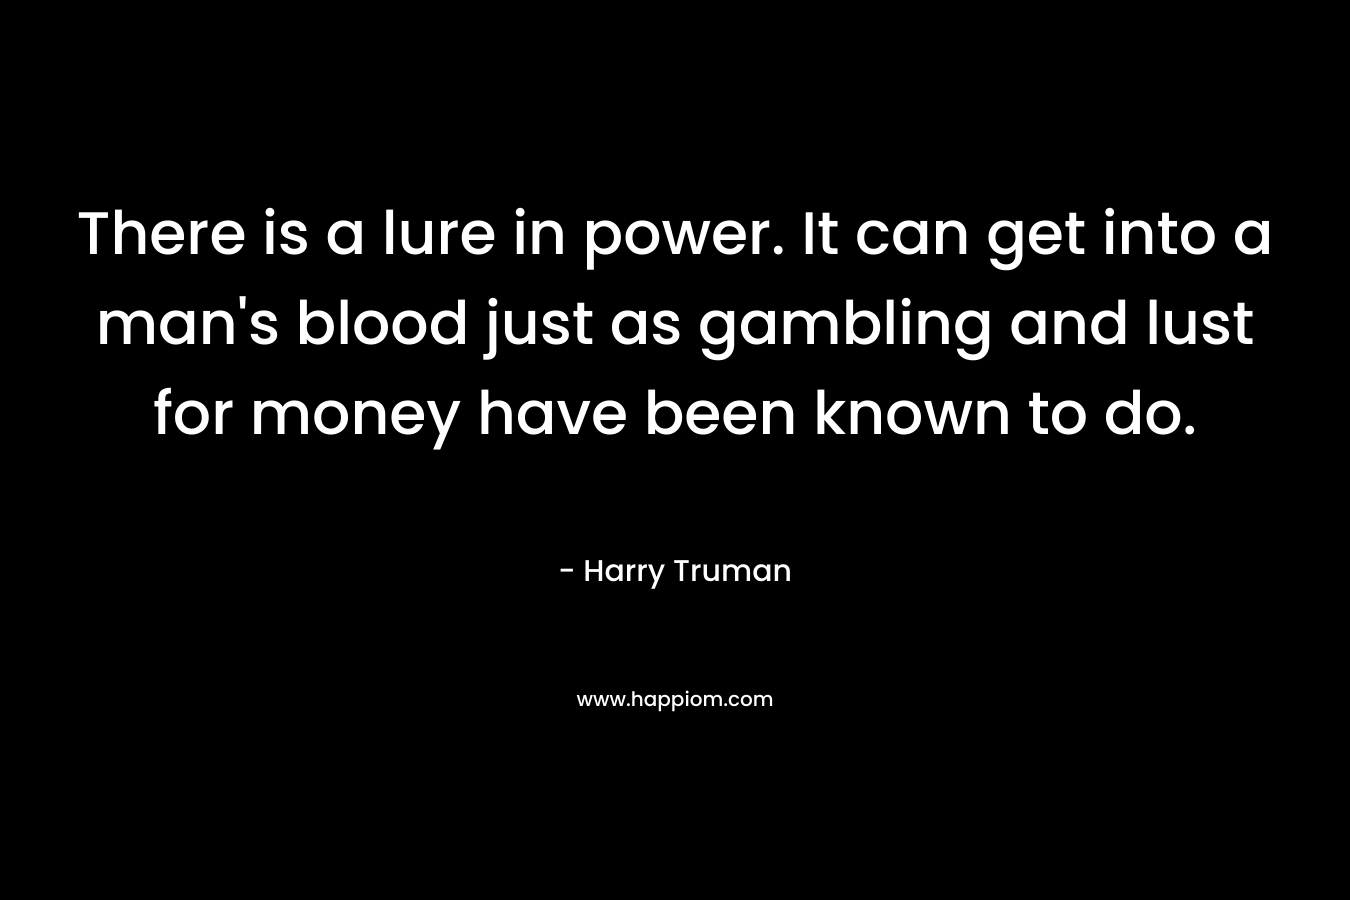 There is a lure in power. It can get into a man's blood just as gambling and lust for money have been known to do.